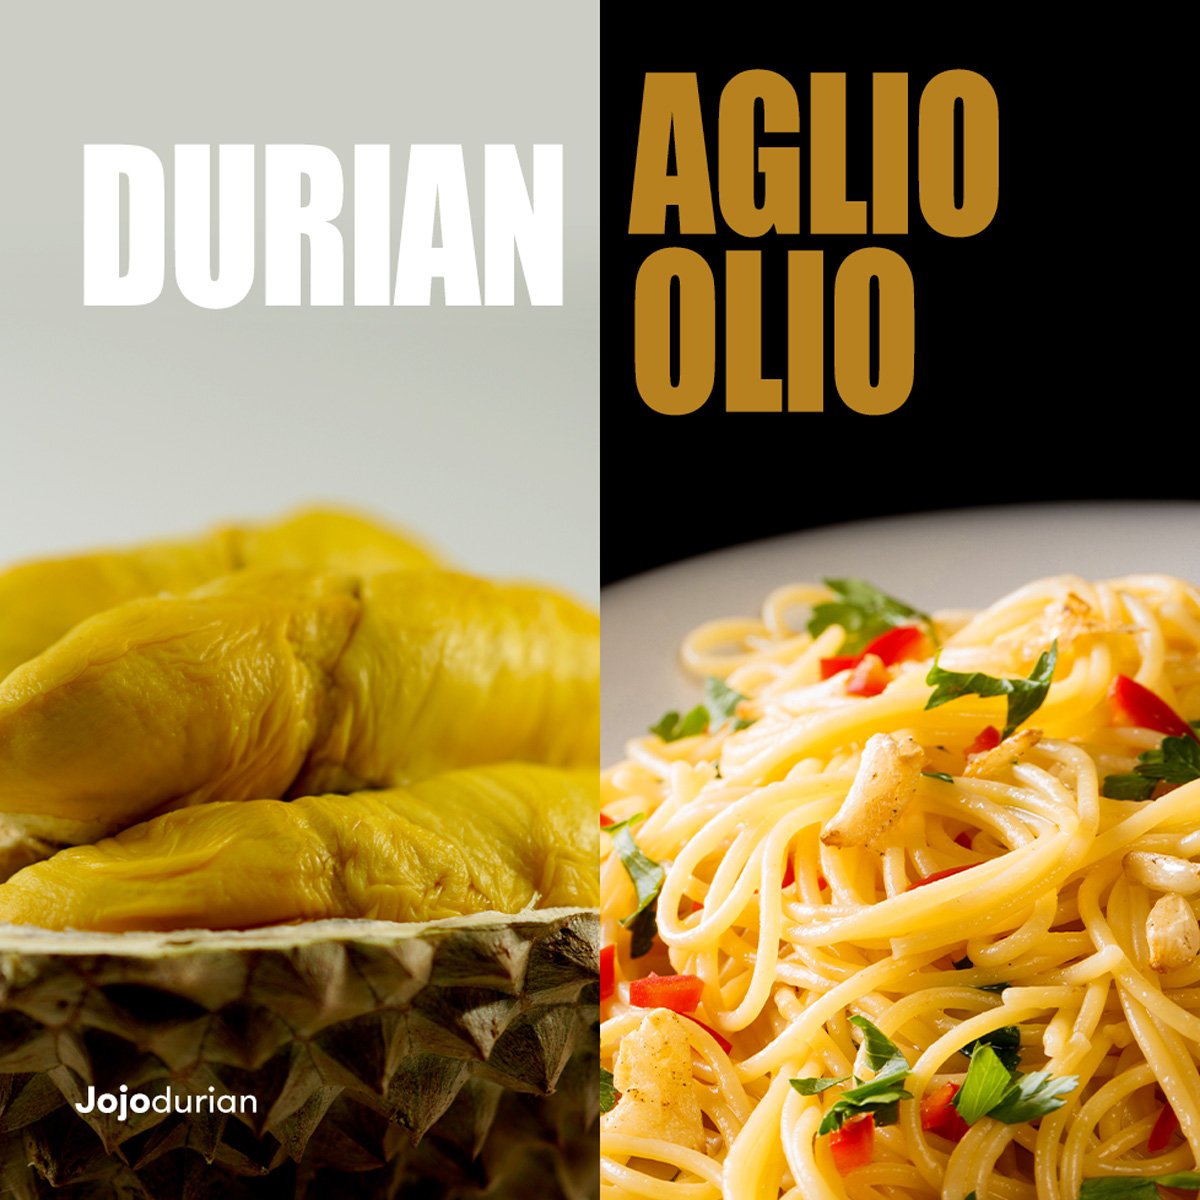 Meal replacement: Durian vs Aglio Olio